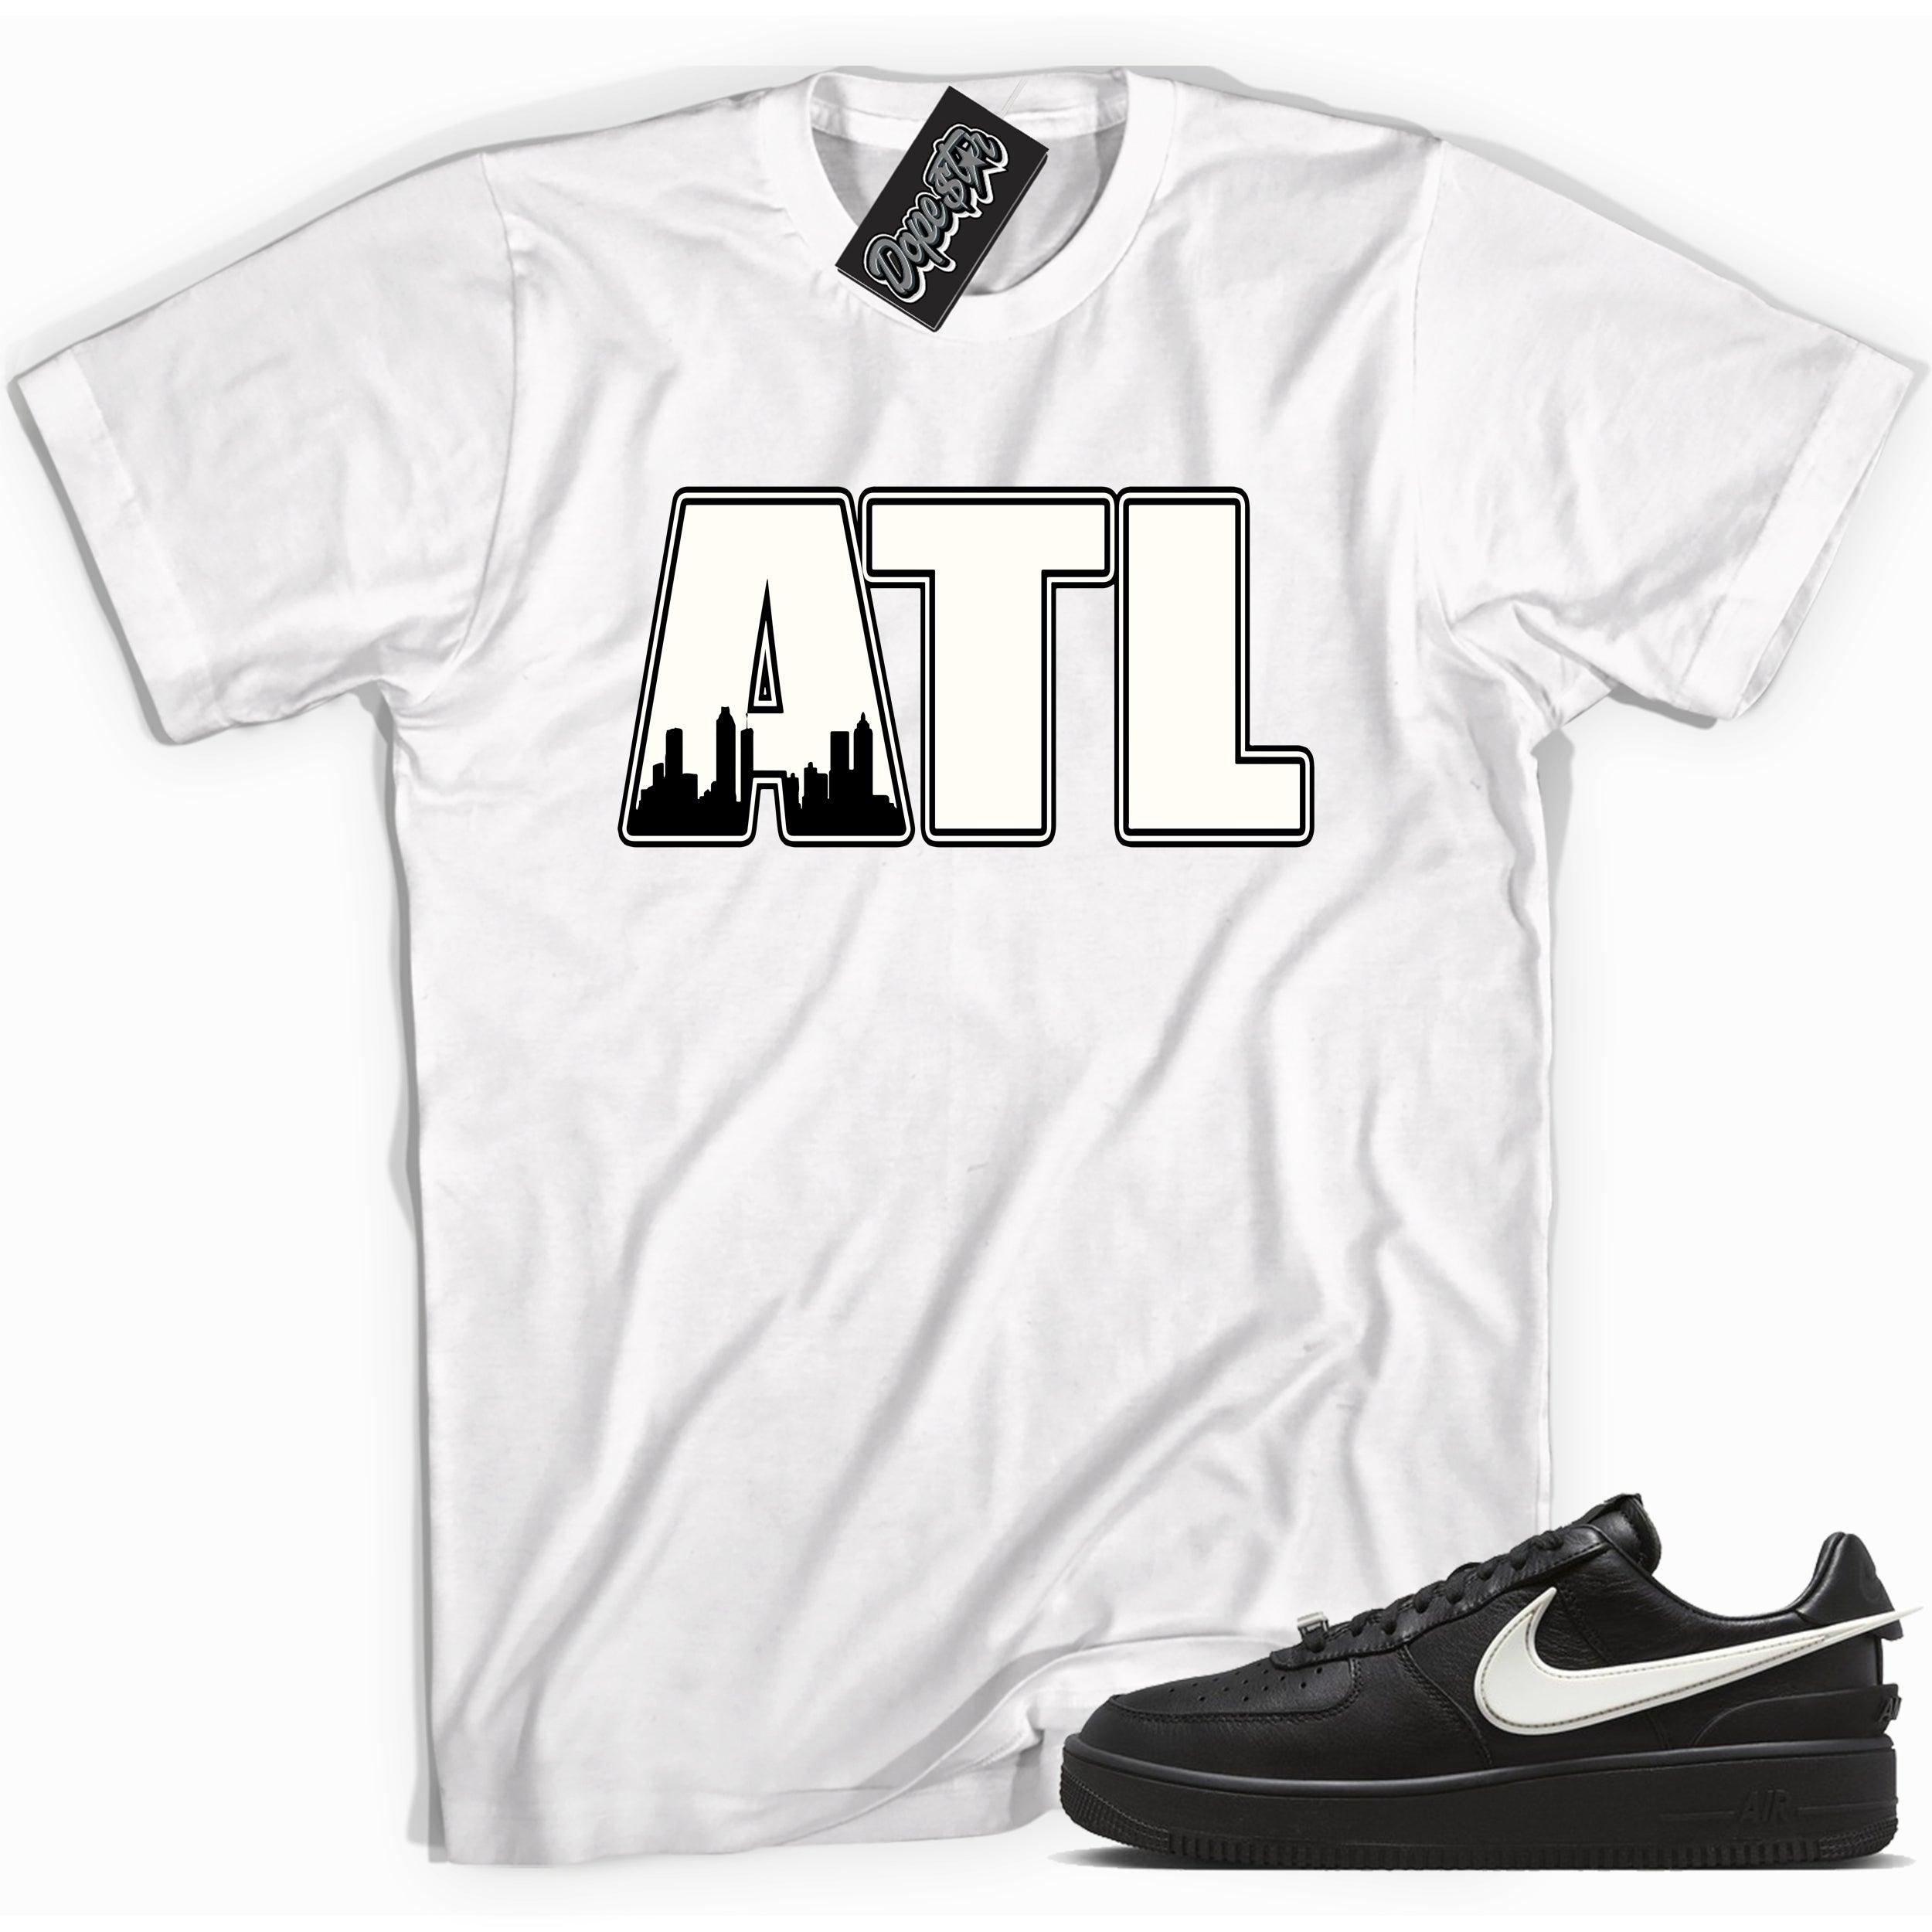 Cool white graphic tee with 'Atlanta ATL' print, that perfectly matches Nike Air Force 1 Low SP Ambush Phantom sneakers.